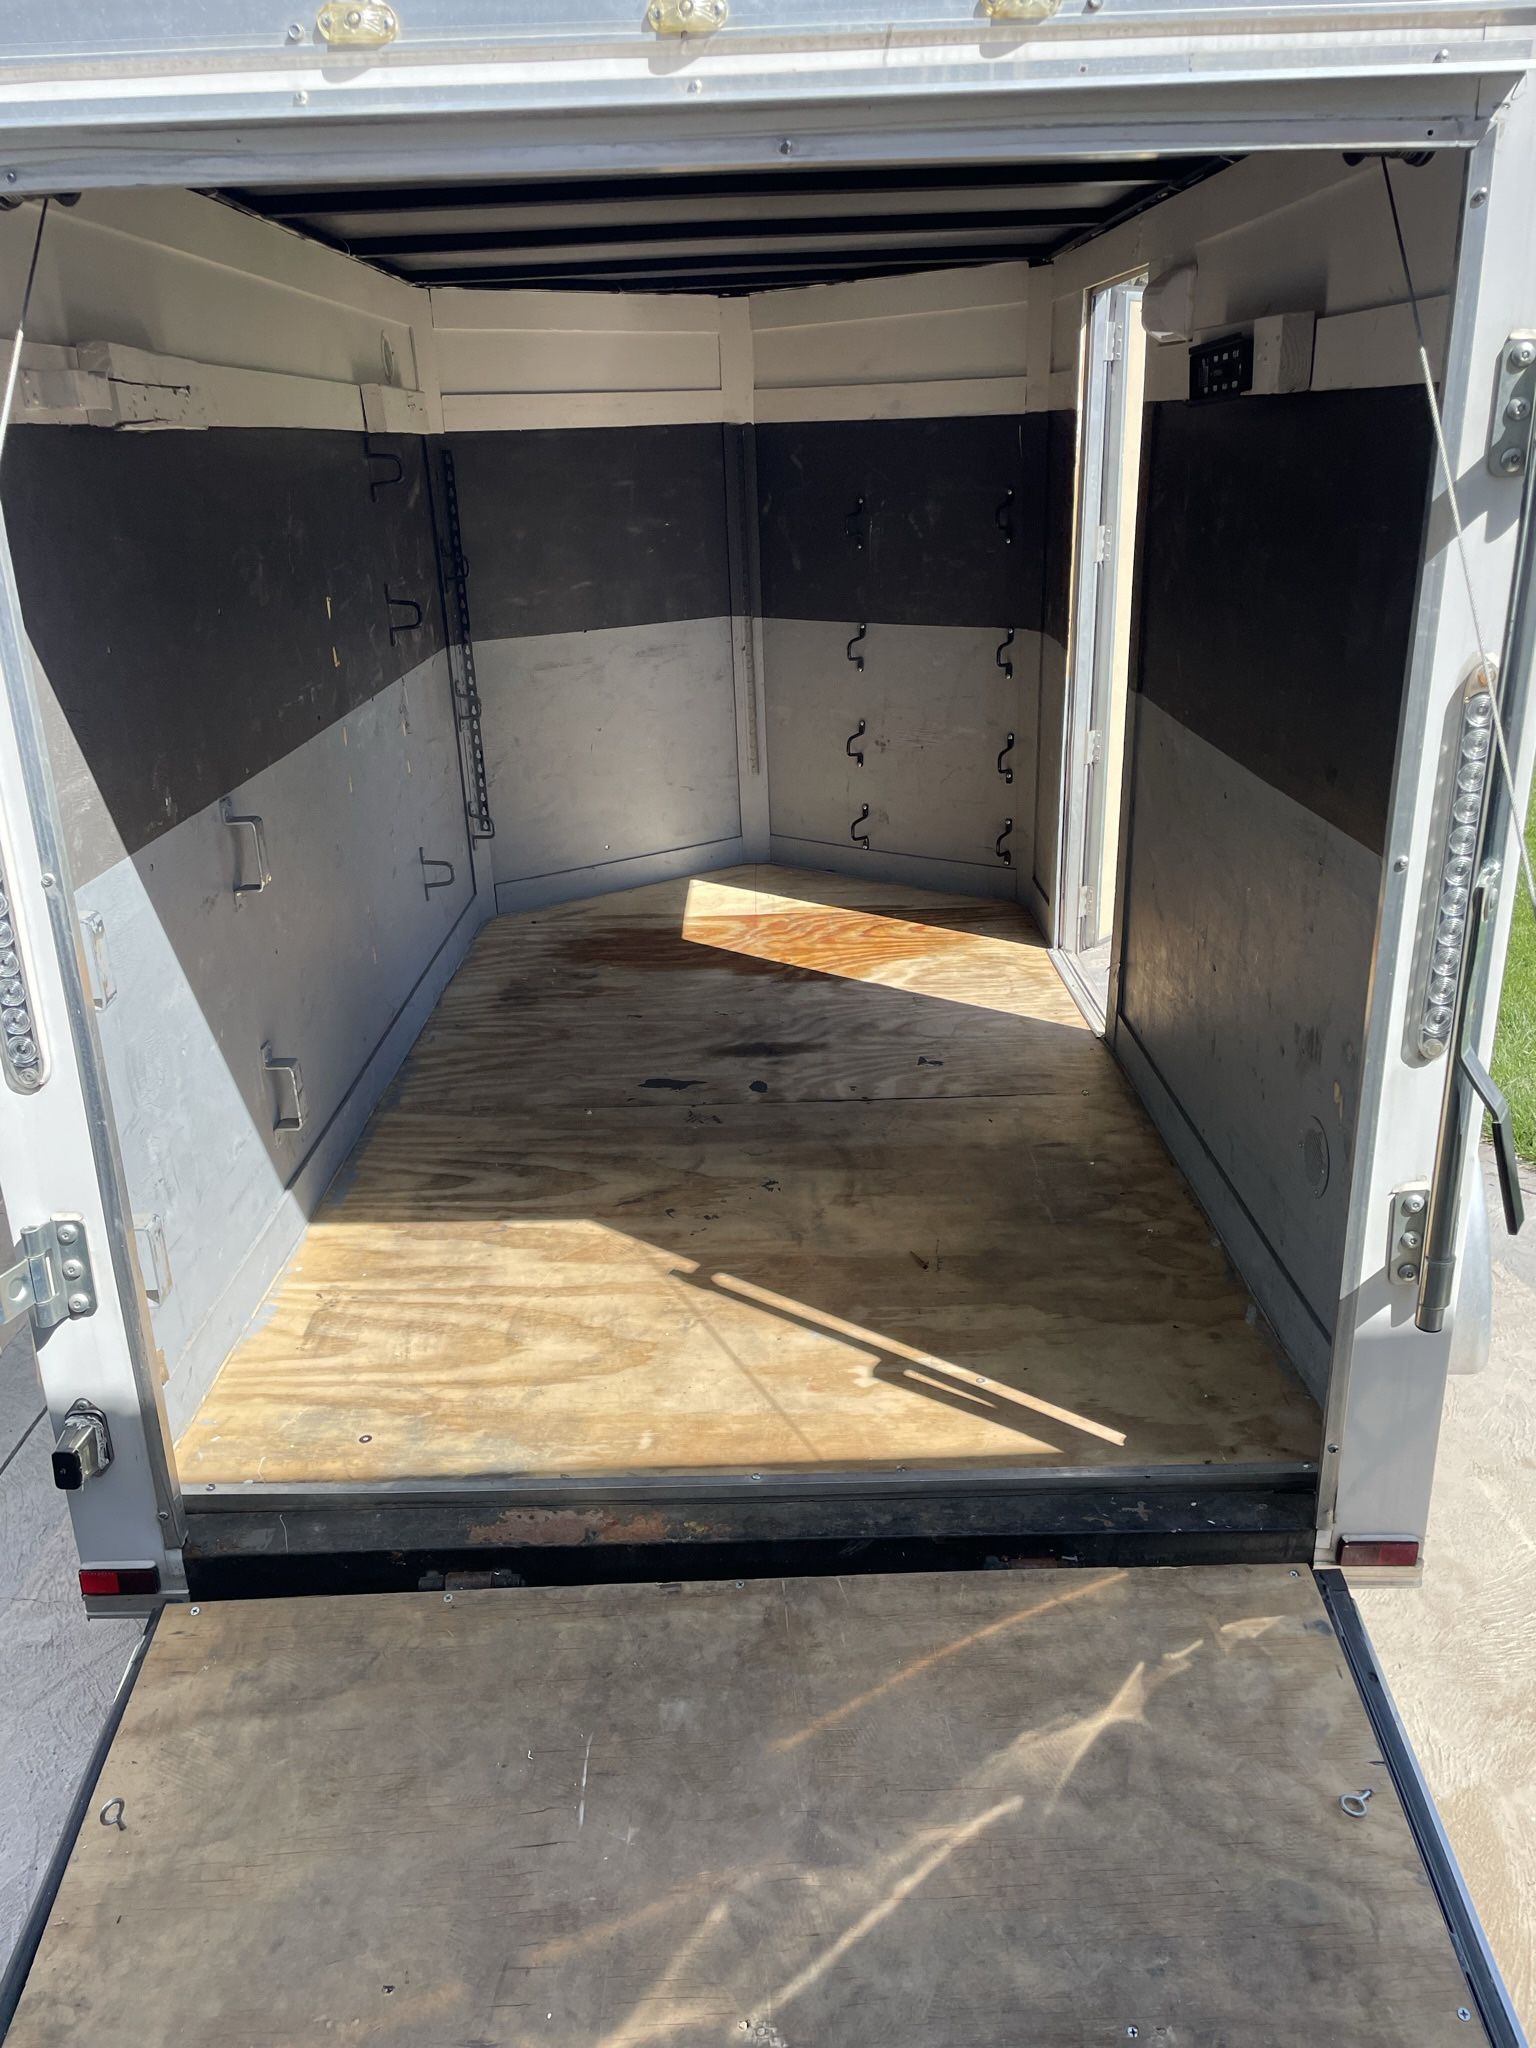 8 By 5 Trailer 2019 For Sale $2800